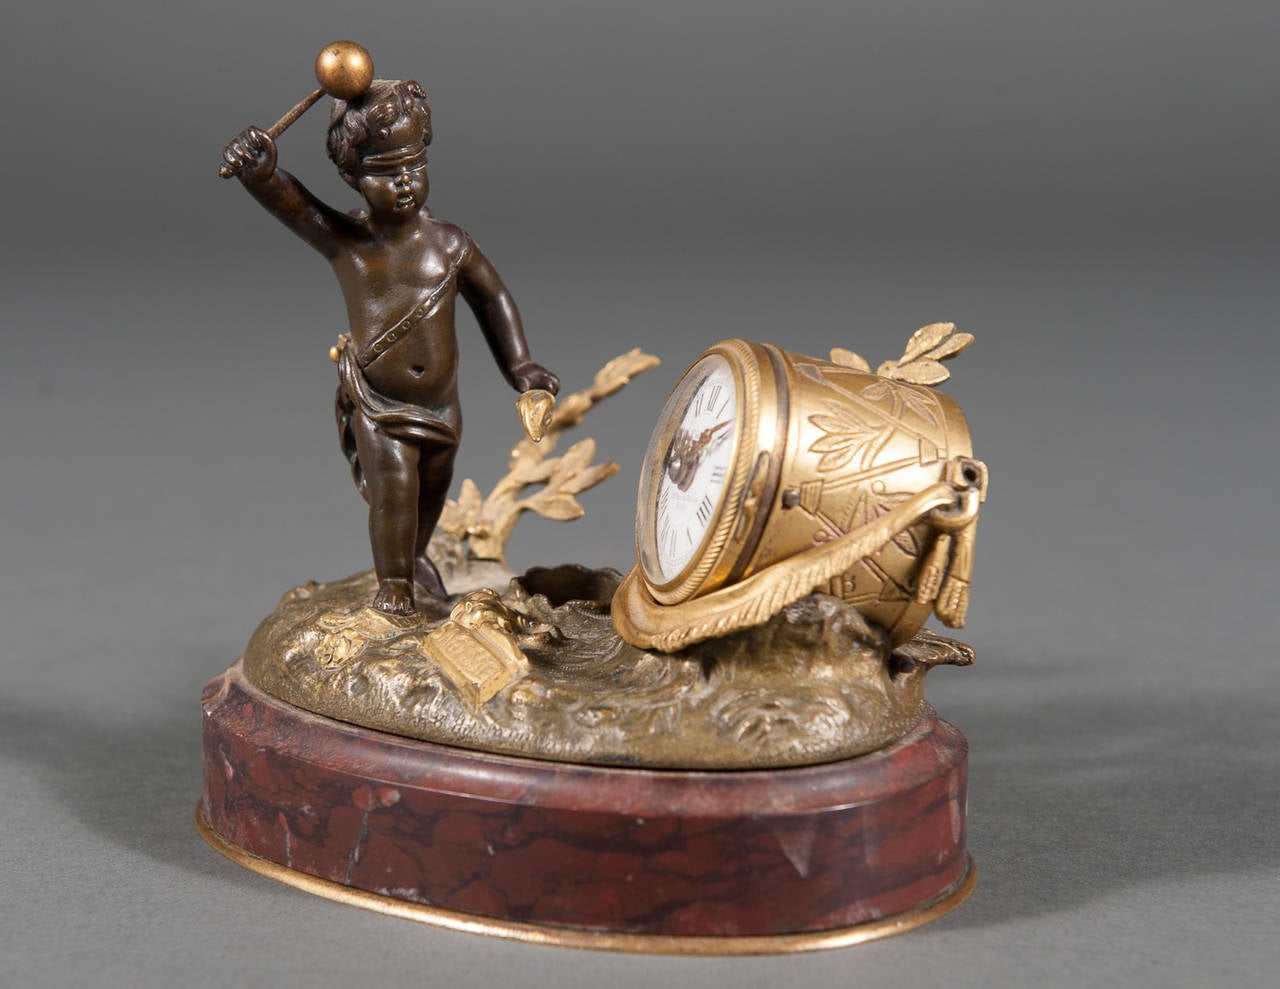 A charming miniature 19th century French gilt bronze patinated and Rouge marble clock cast with a blindfolded Cupid figure wielding a torch and drum mallet prepared to strike a drum-form clock, the circular white enamel dial with Roman hours and